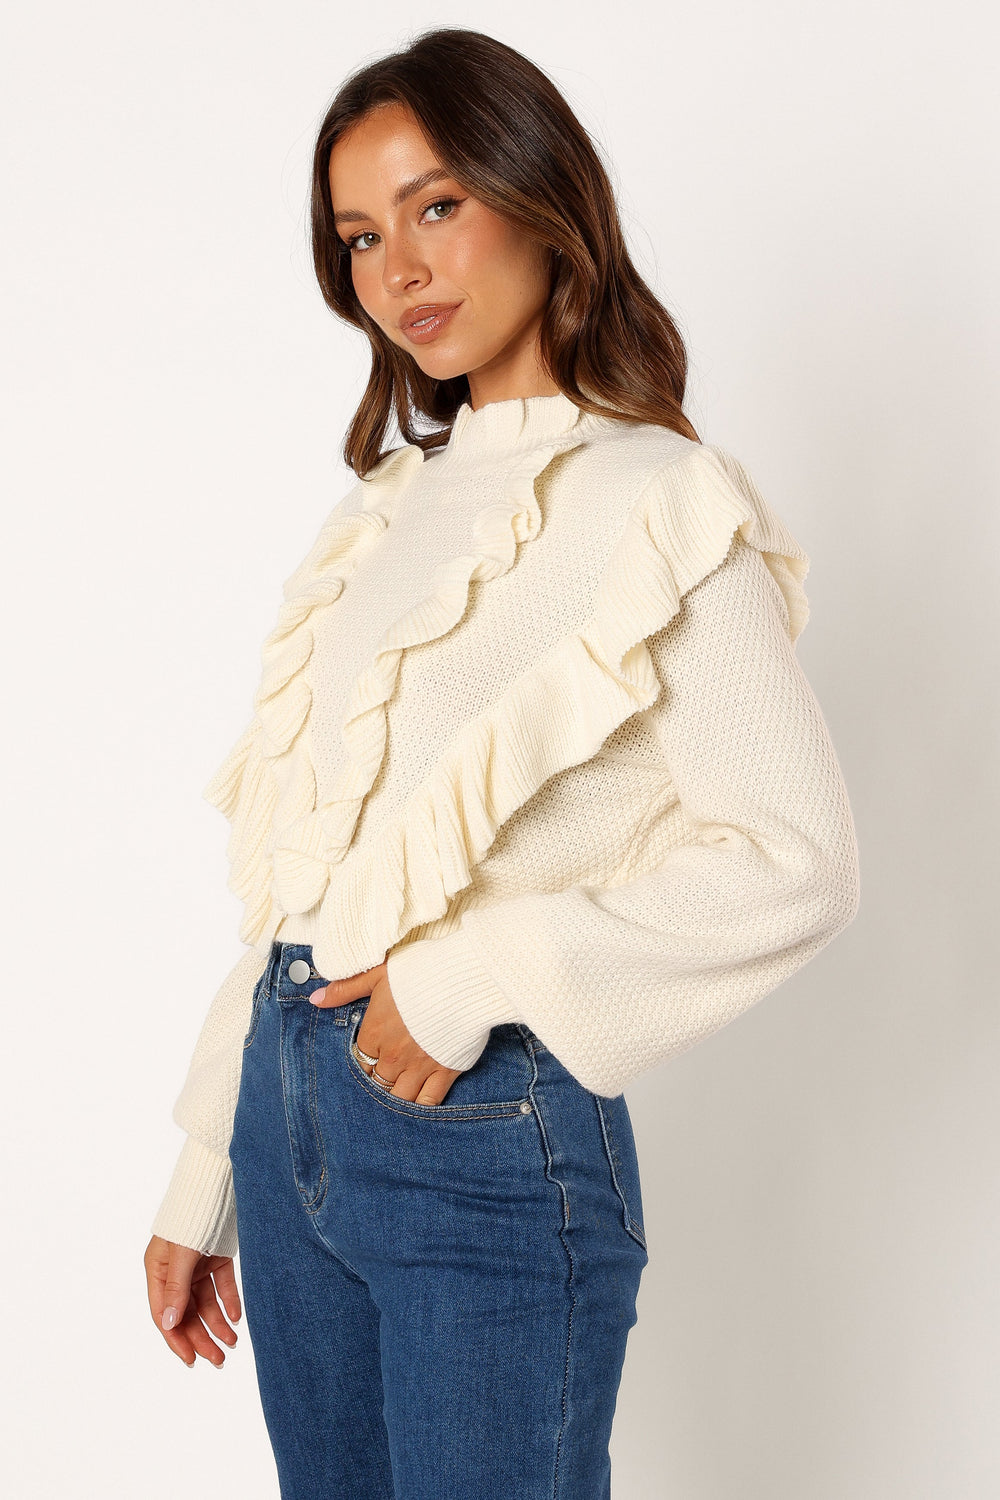 Petal and Pup USA TOPS Charice Knit Long Sleeve Top - Cream